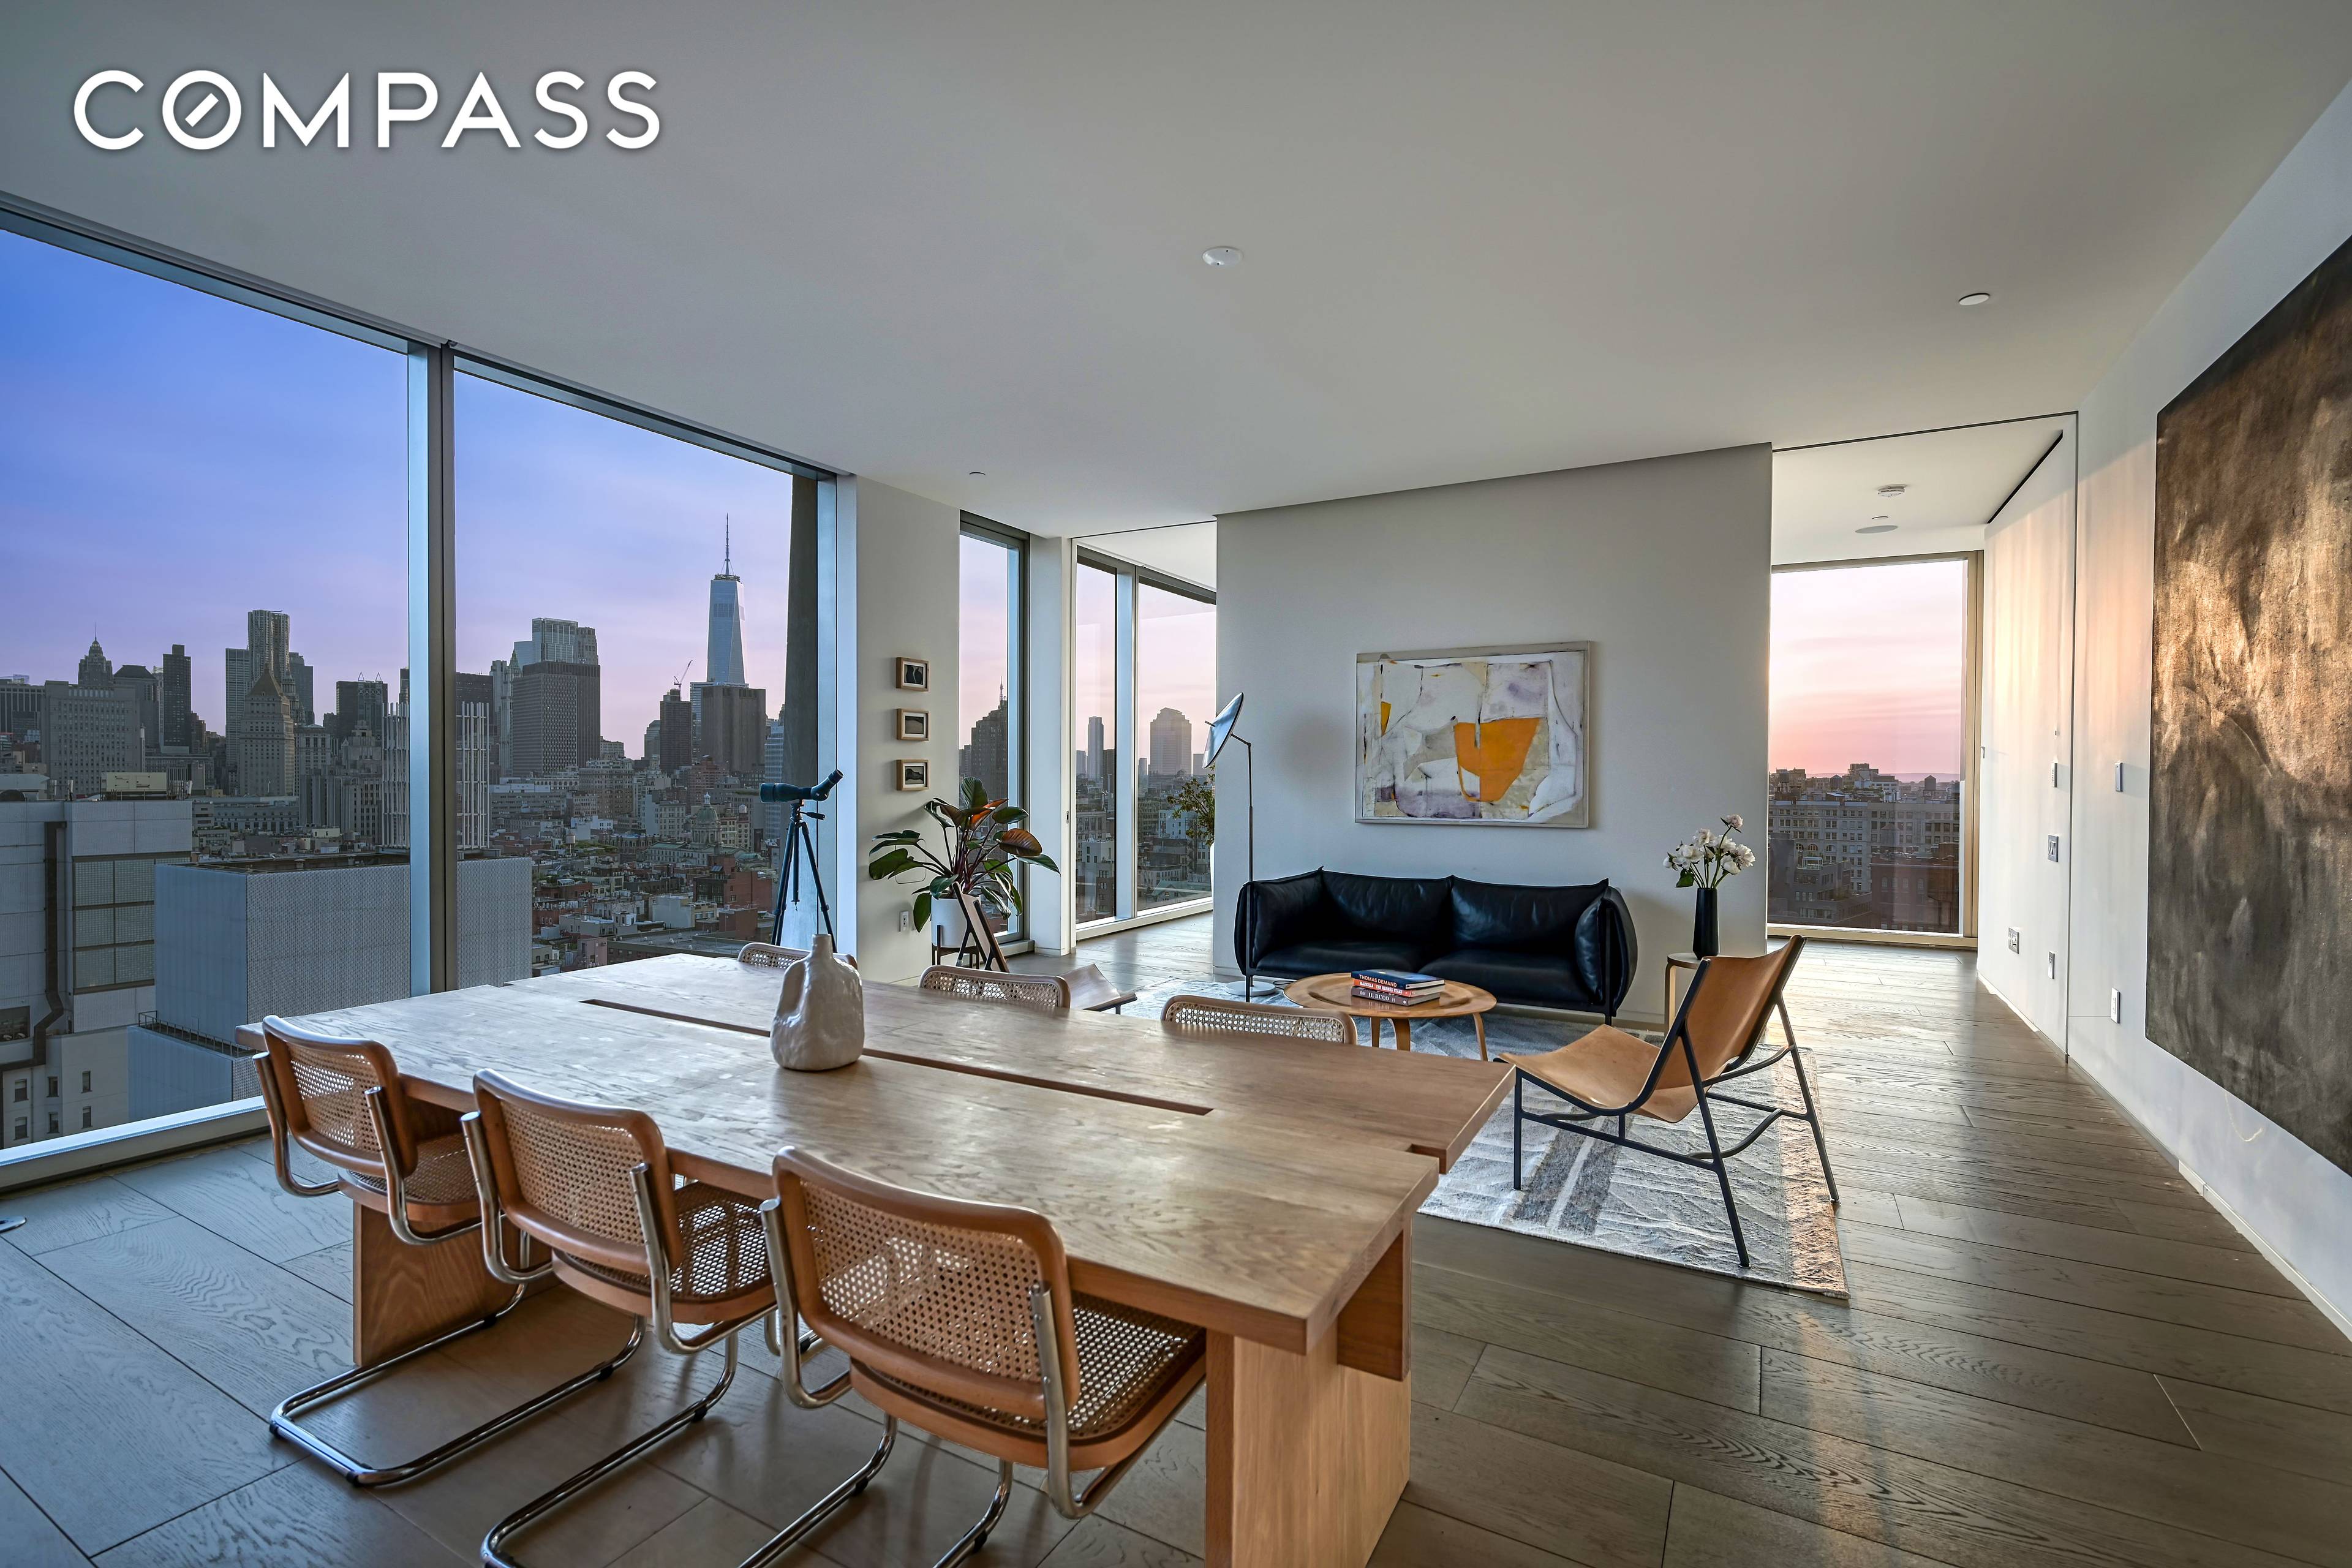 This 1 bedroom, 1. 5 bathroom is one of the most impressive apartments currently on the market in Downtown Manhattan.